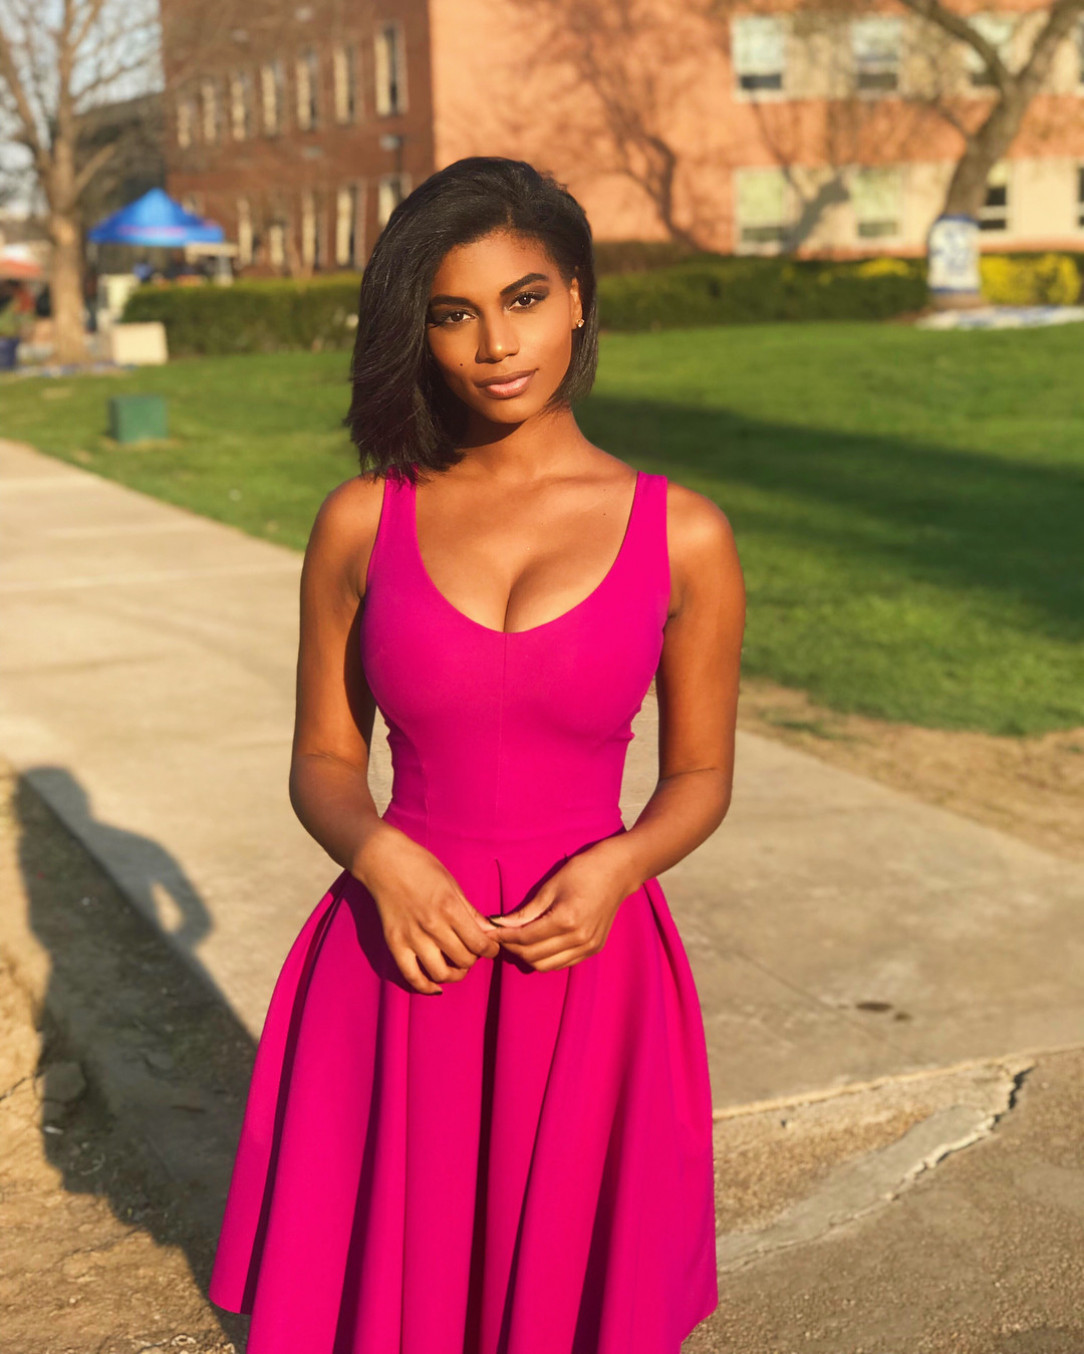 Sports reporter Taylor Rooks